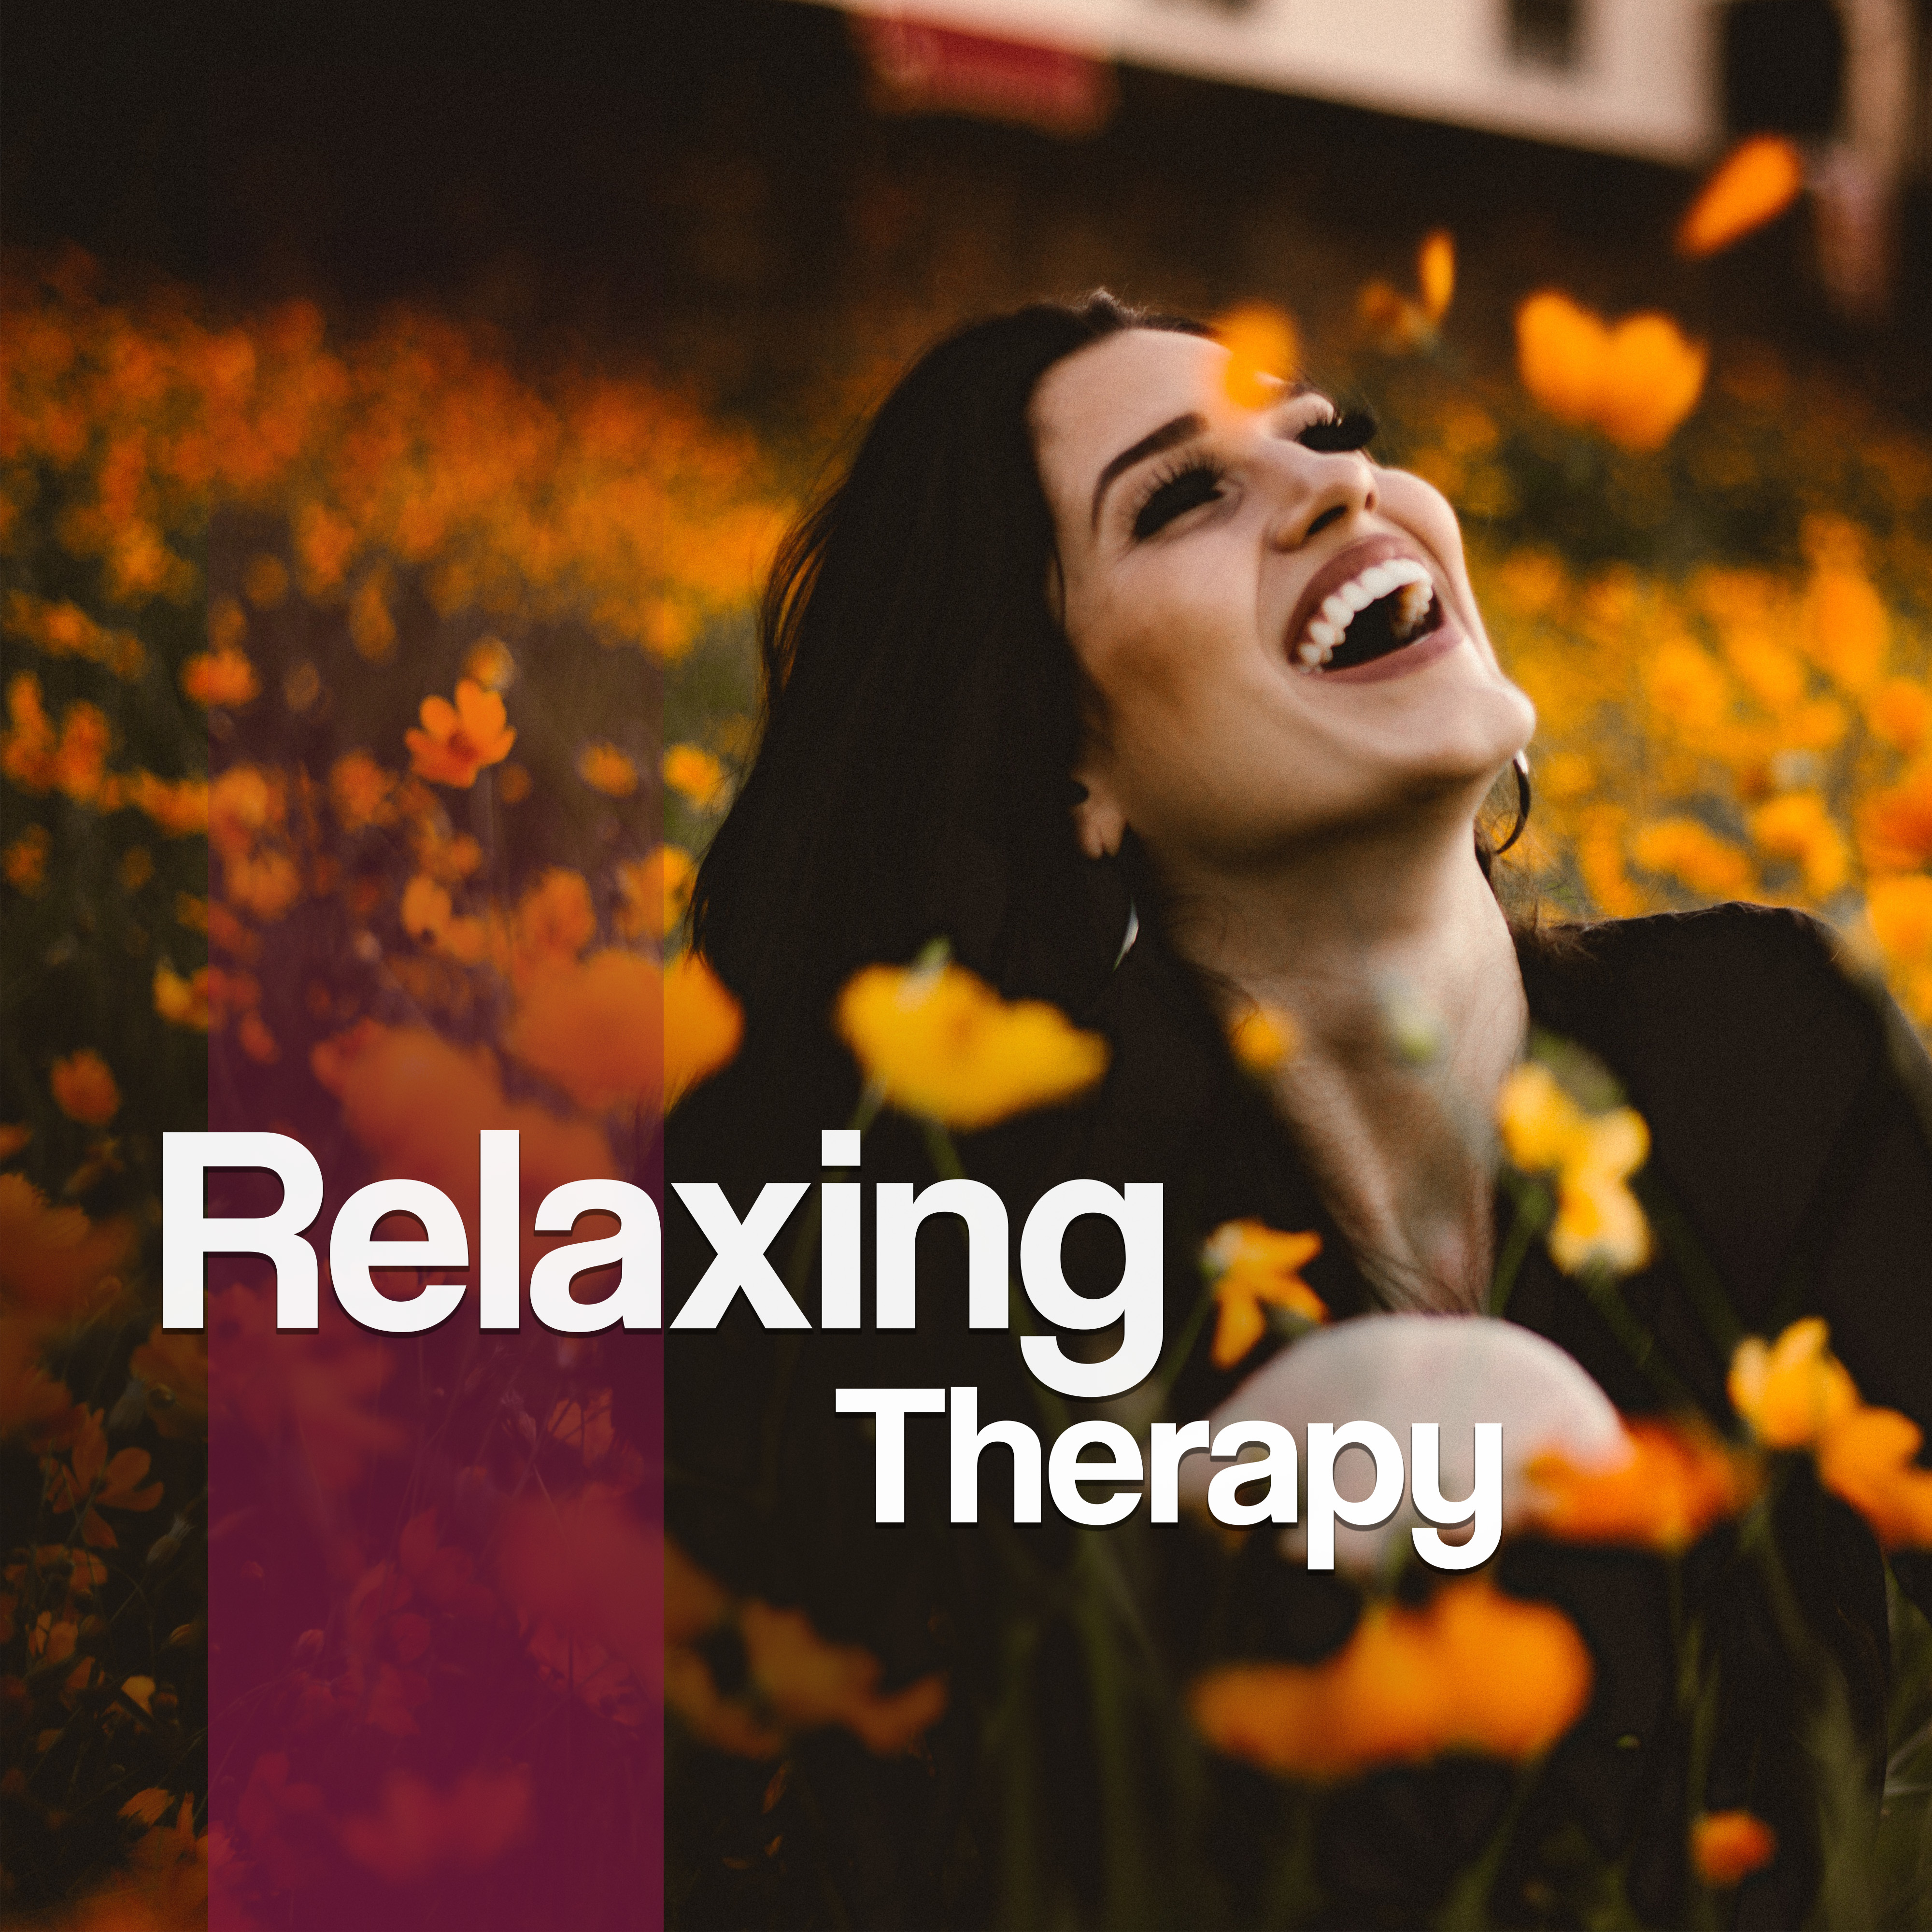 Relaxing Therapy  Soft Music for Relaxation, Calmness, Harmony, Pure Sleep, Nature Sounds, Oriental Music, Peaceful Mind